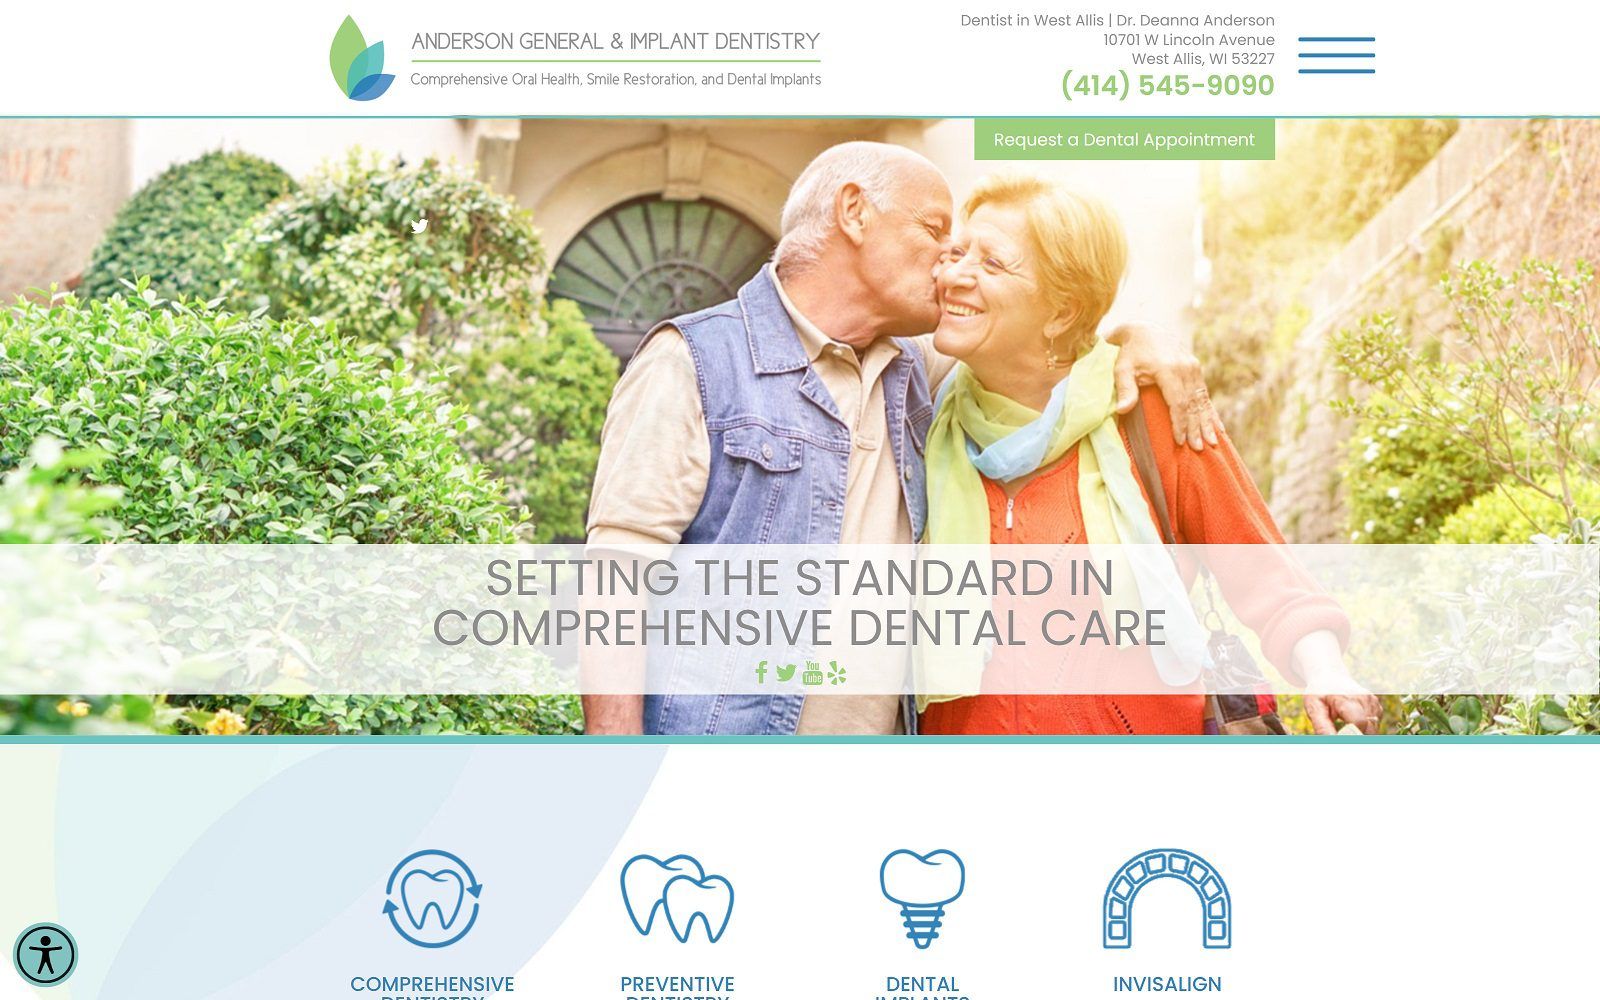 The Screenshot of Anderson General & Implant Dentistry Website